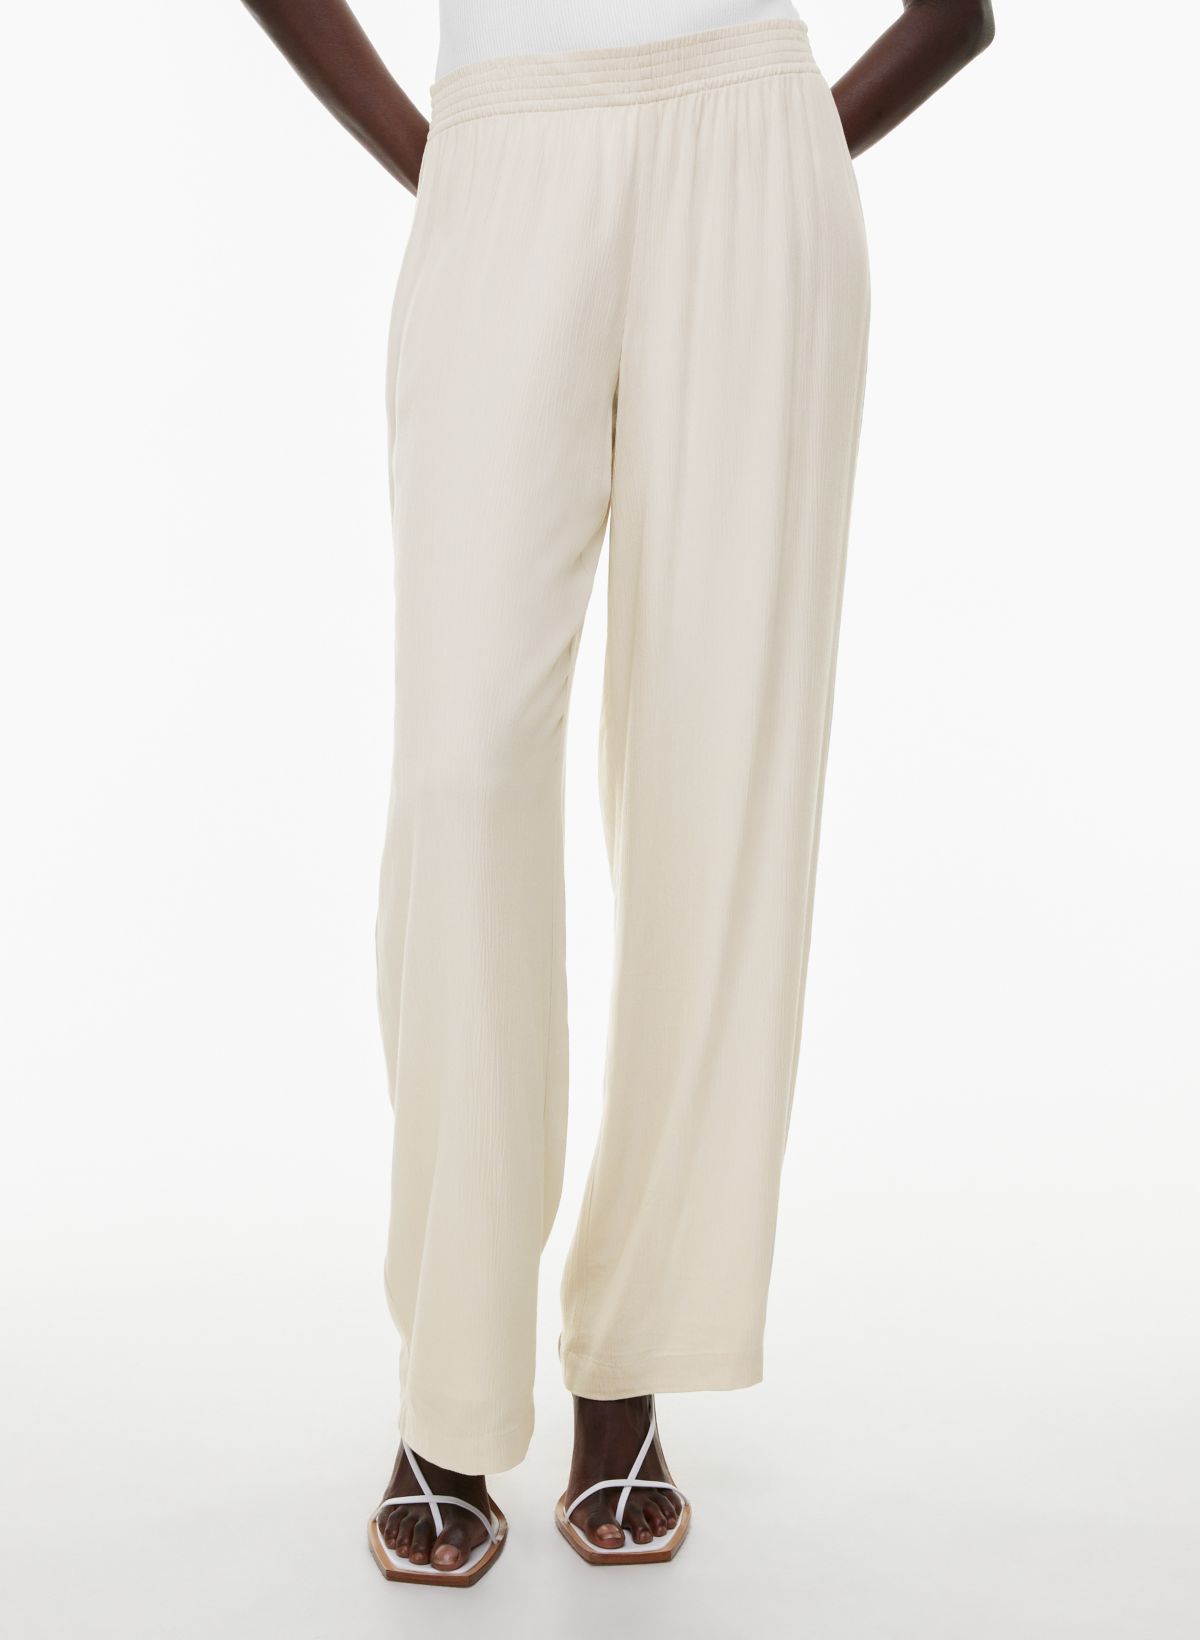 One of my favourite aritzia pieces ever! They are ASS PANTS